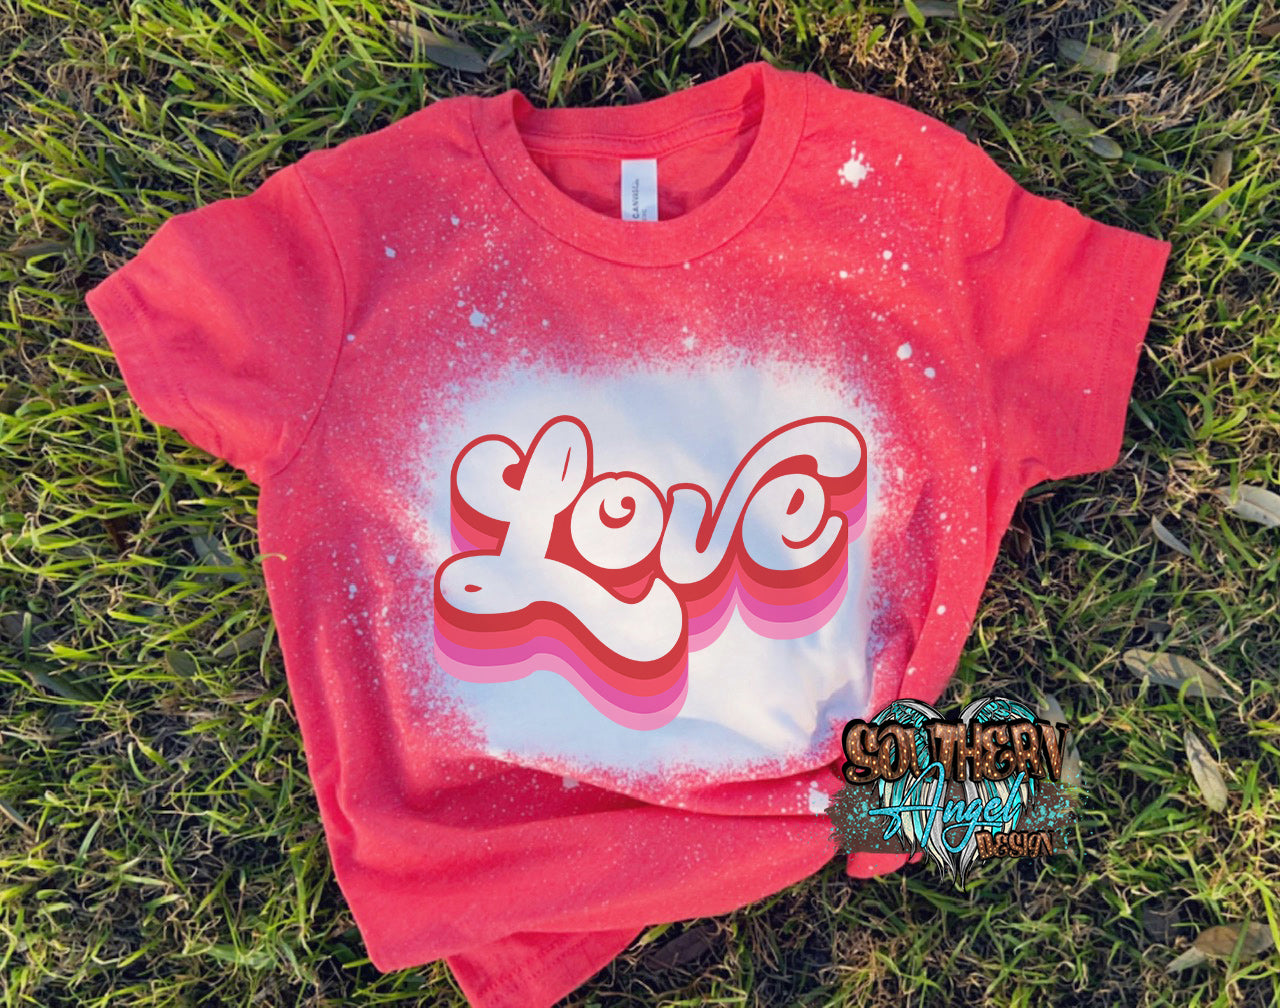 Maroon Retro Love youth bleached shirt image_127c2818-f99c-4609-8b70-594321746997.jpg retro-love-youth-bleached-shirt Kids Valentine’s Day